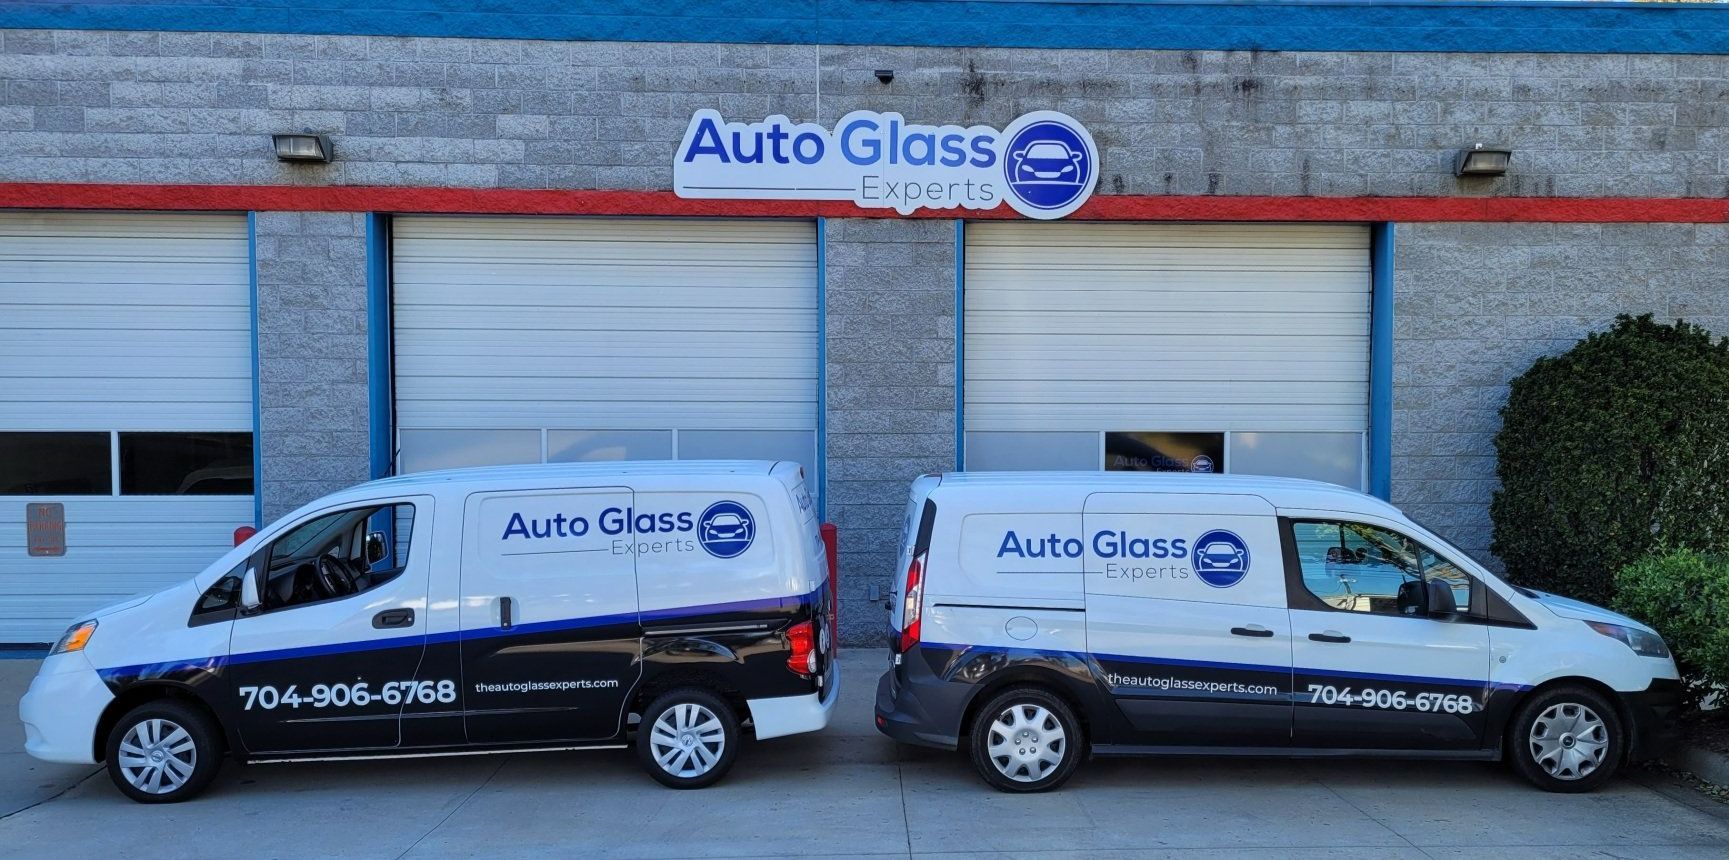 Mobile Auto Glass Service in Kannapolis, NC